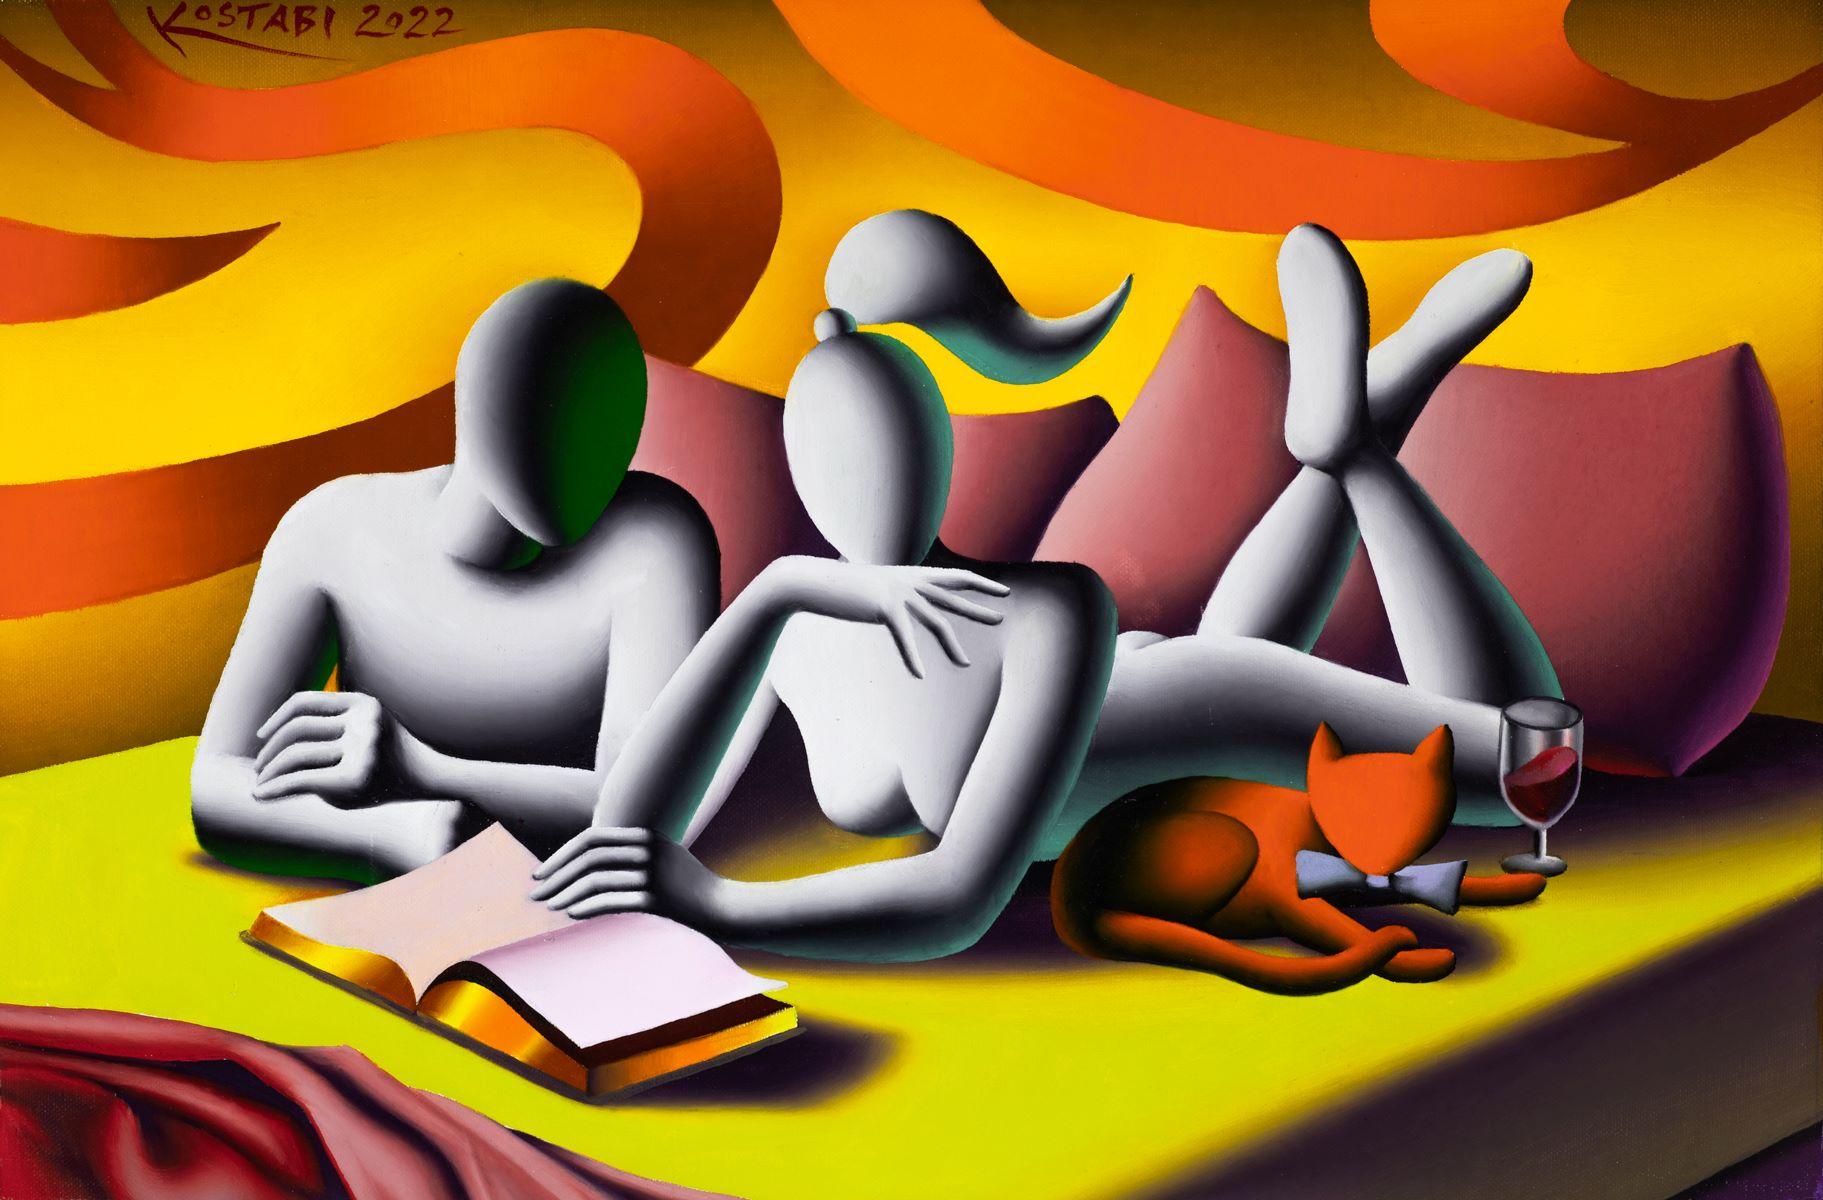 Lit Cats, 2022 - Painting by Mark Kostabi